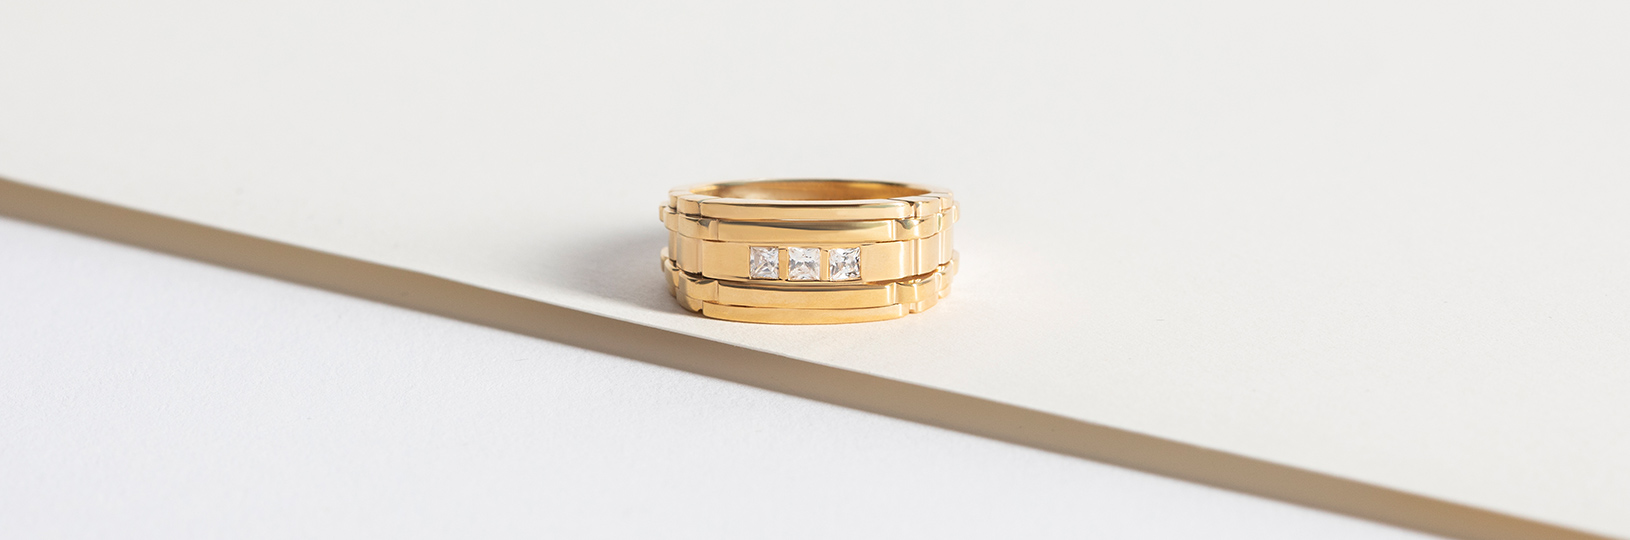 Who Buys the Man’s Wedding Band: Tradition vs Modern Perspective